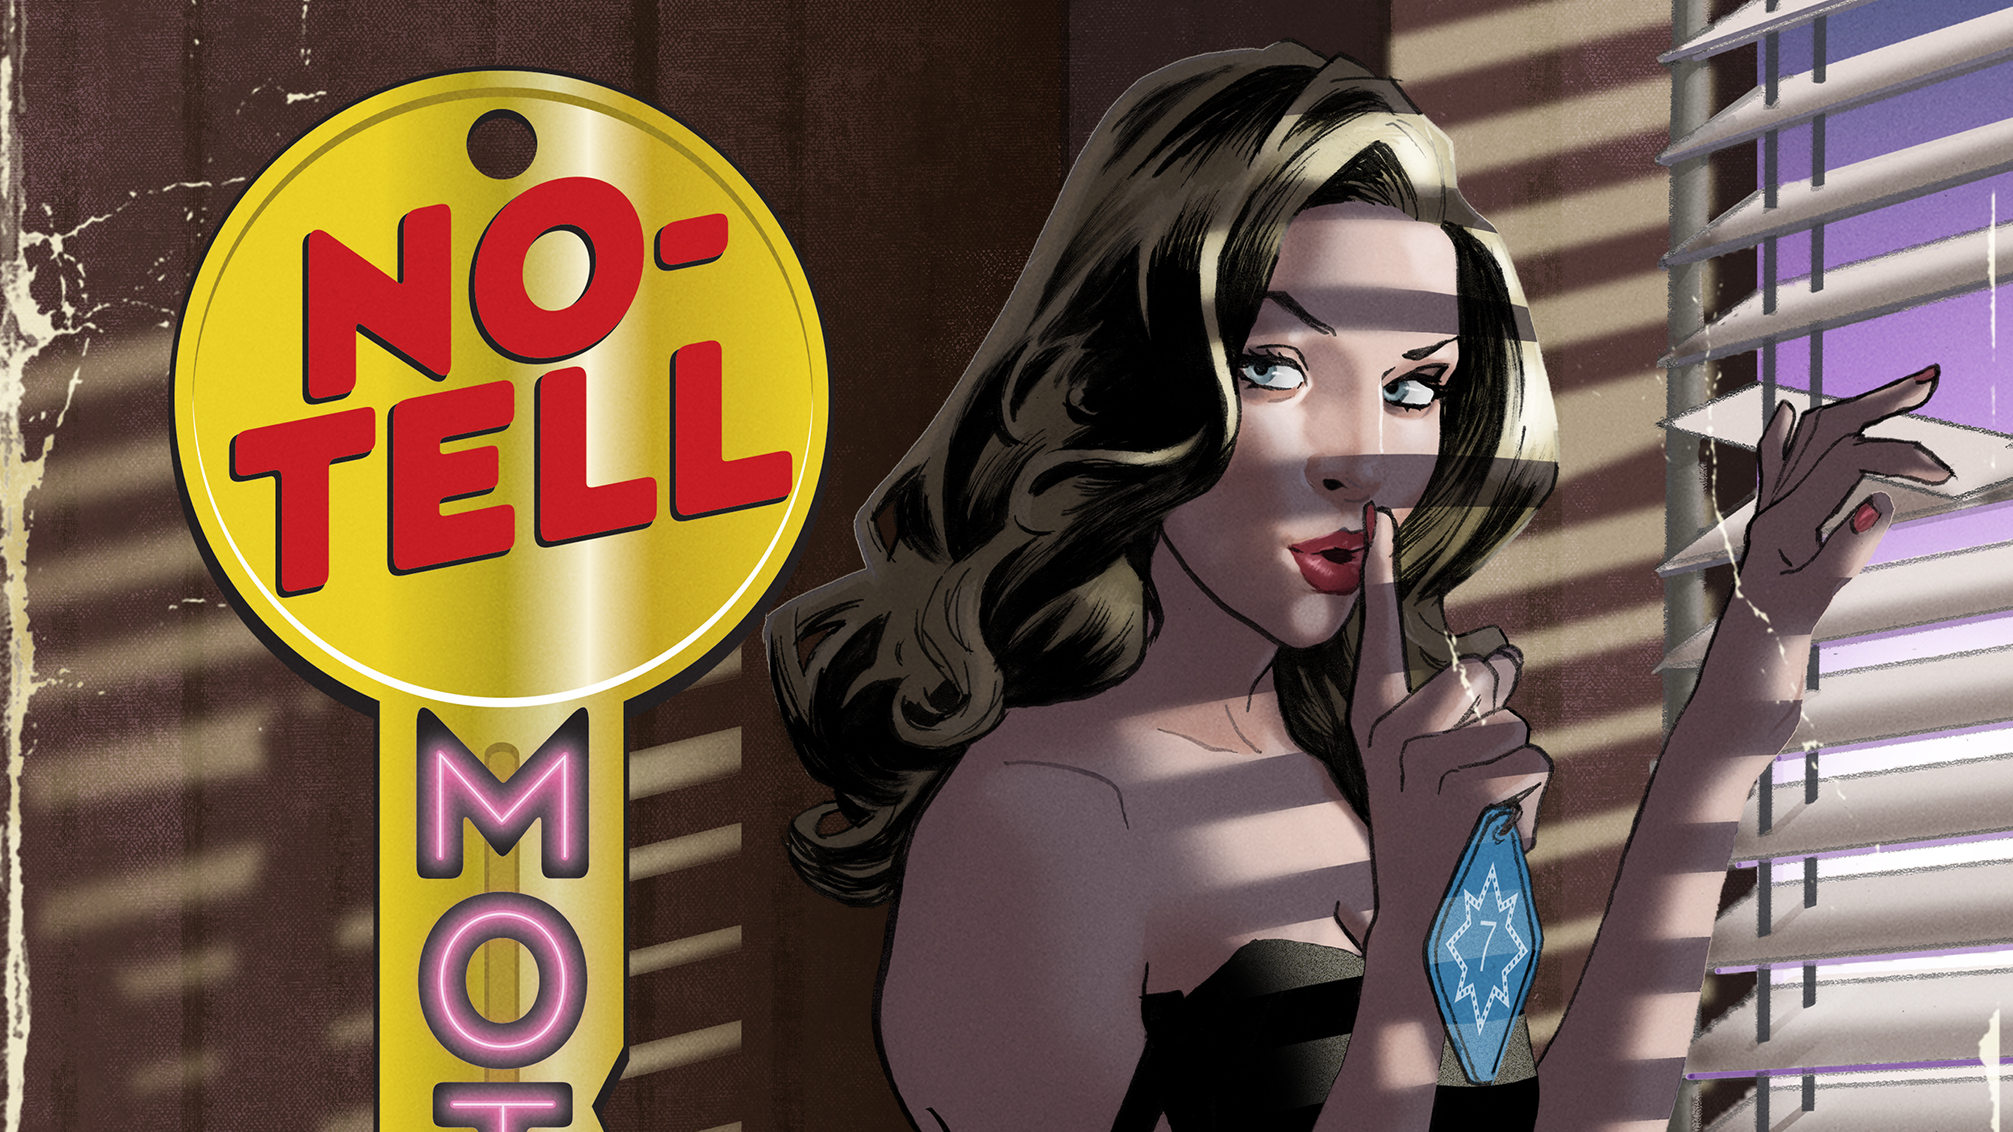 Come for No-Tell Motel's murder mystery, stay for the juicy goss